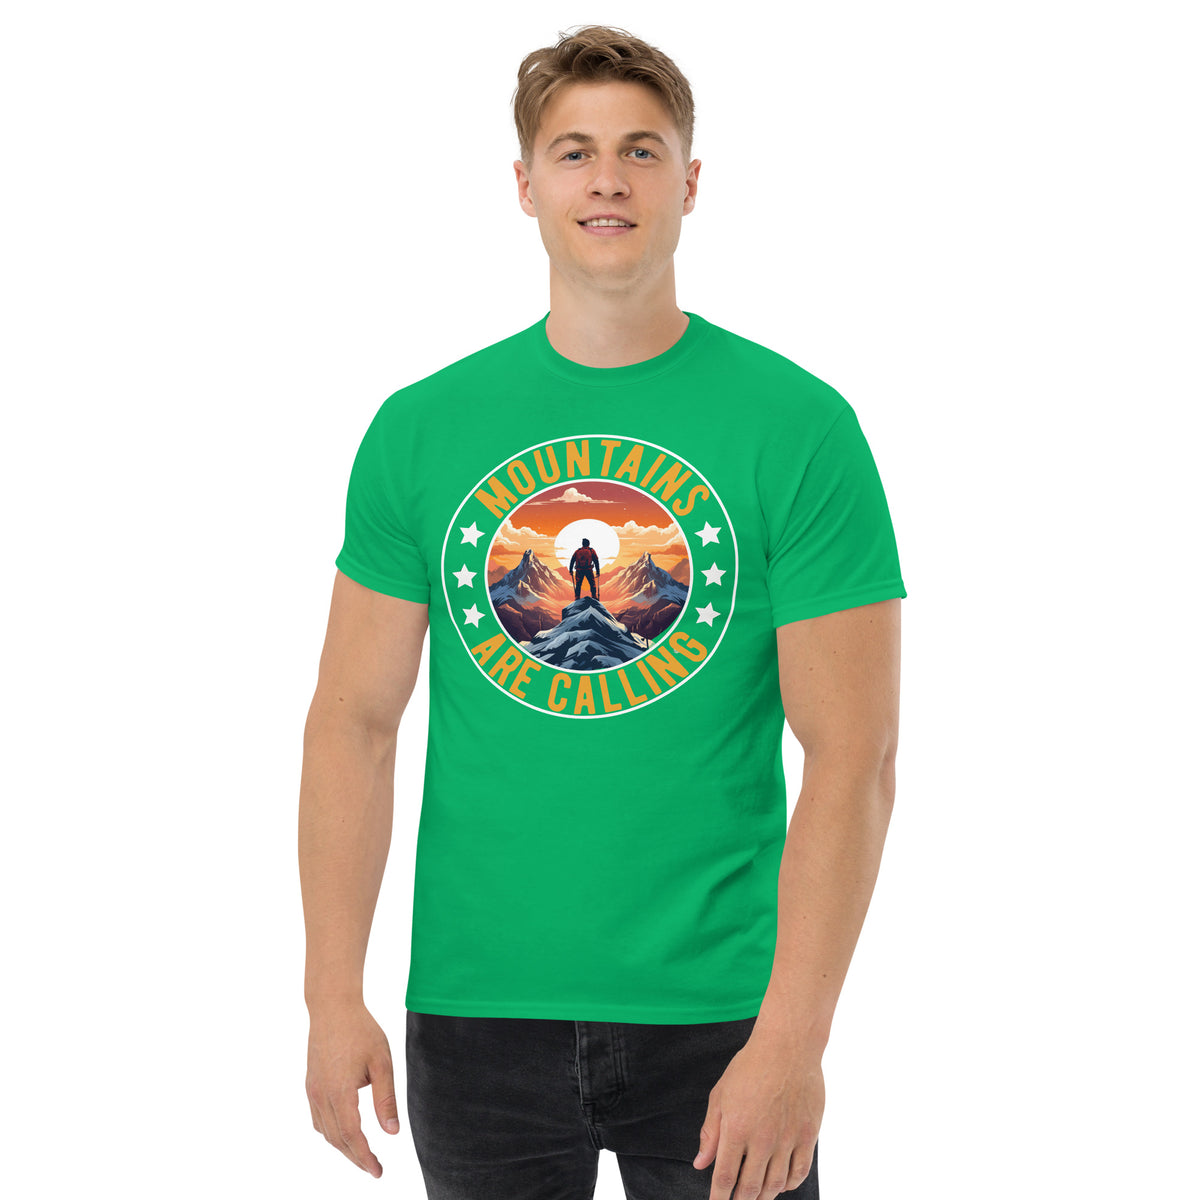 T-Shirt Outdoor & Wandern "Mountains are calling " Variante 3